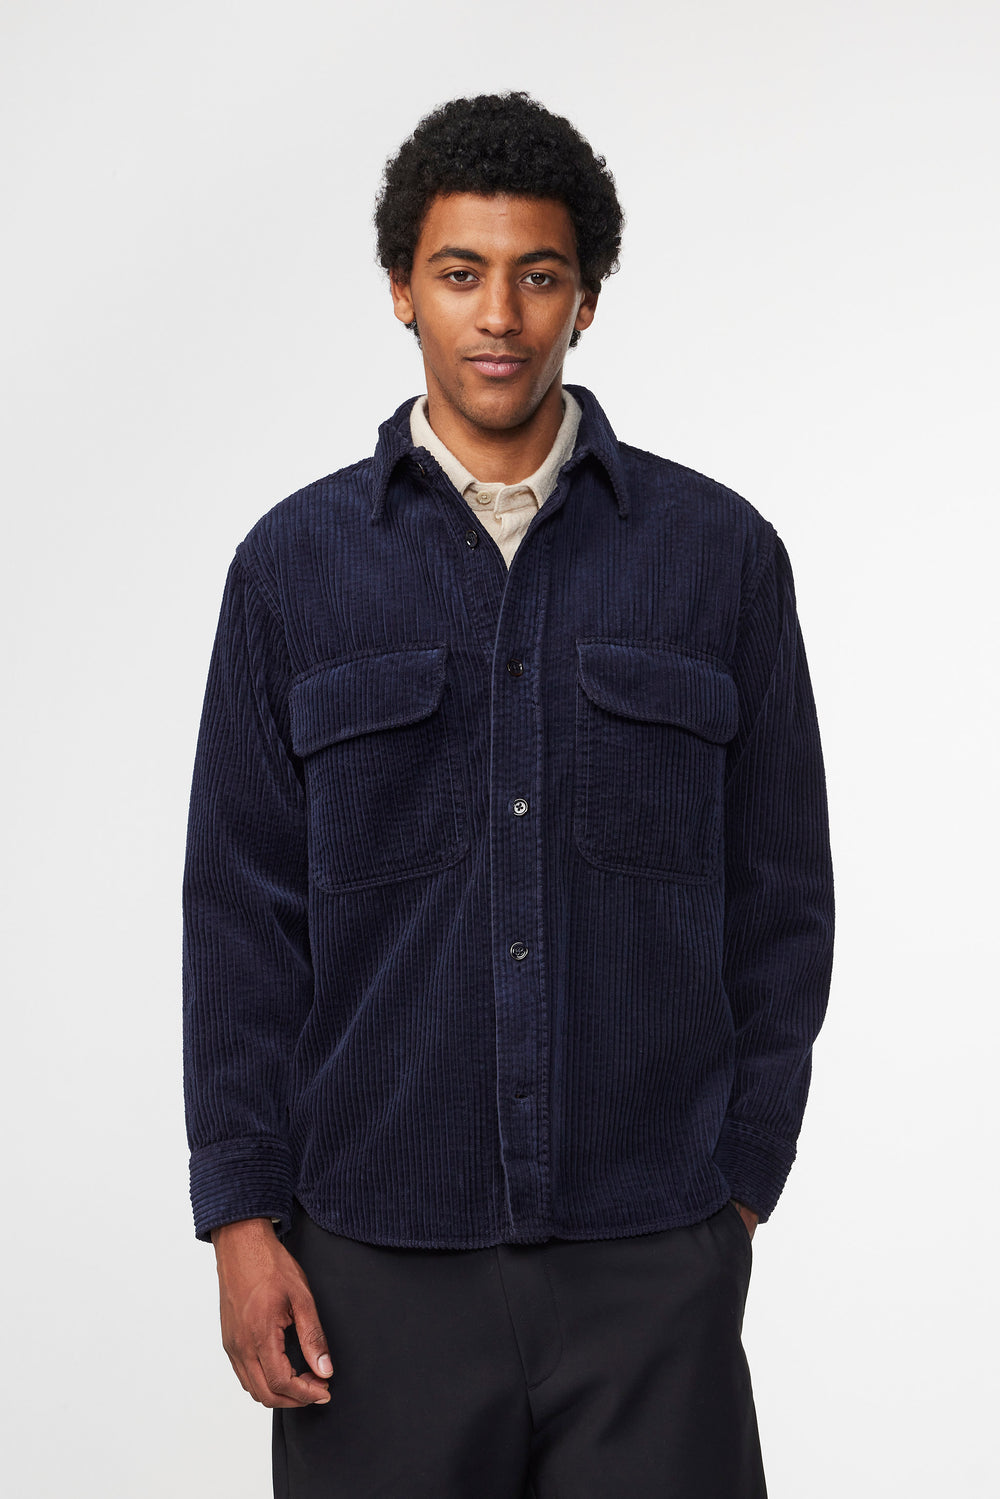 NN07 Folmer 1725 Classic Cord Overshirt in Navy Blue | Buster McGee